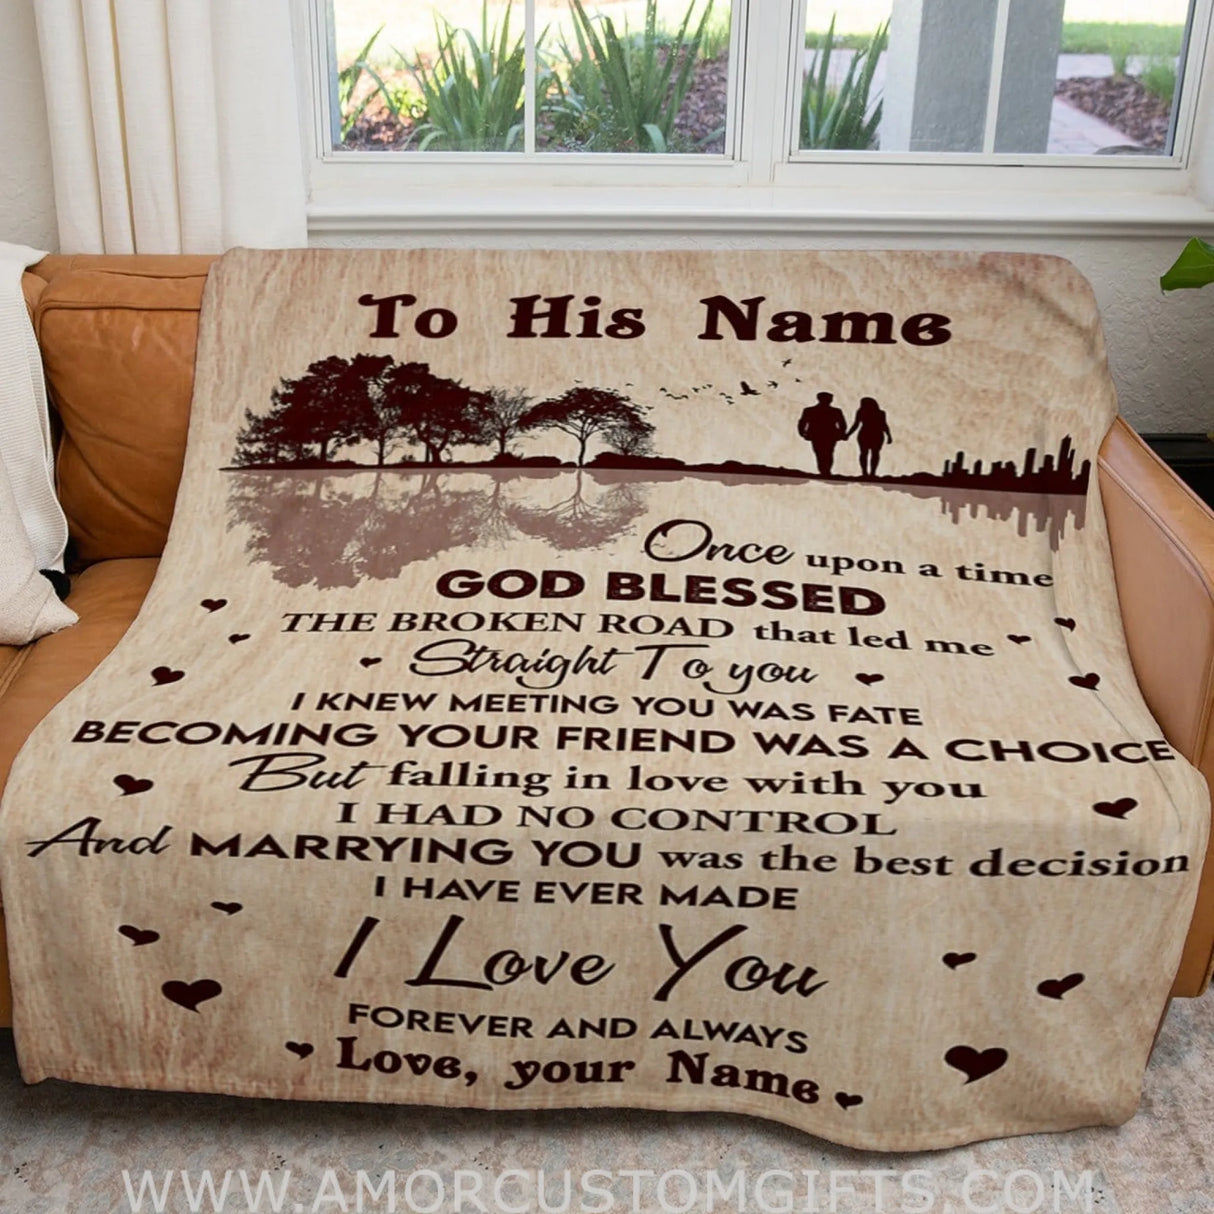 Blankets Blanket Gift For Him, Anniversary Gift For Husband, Once Upon a Time